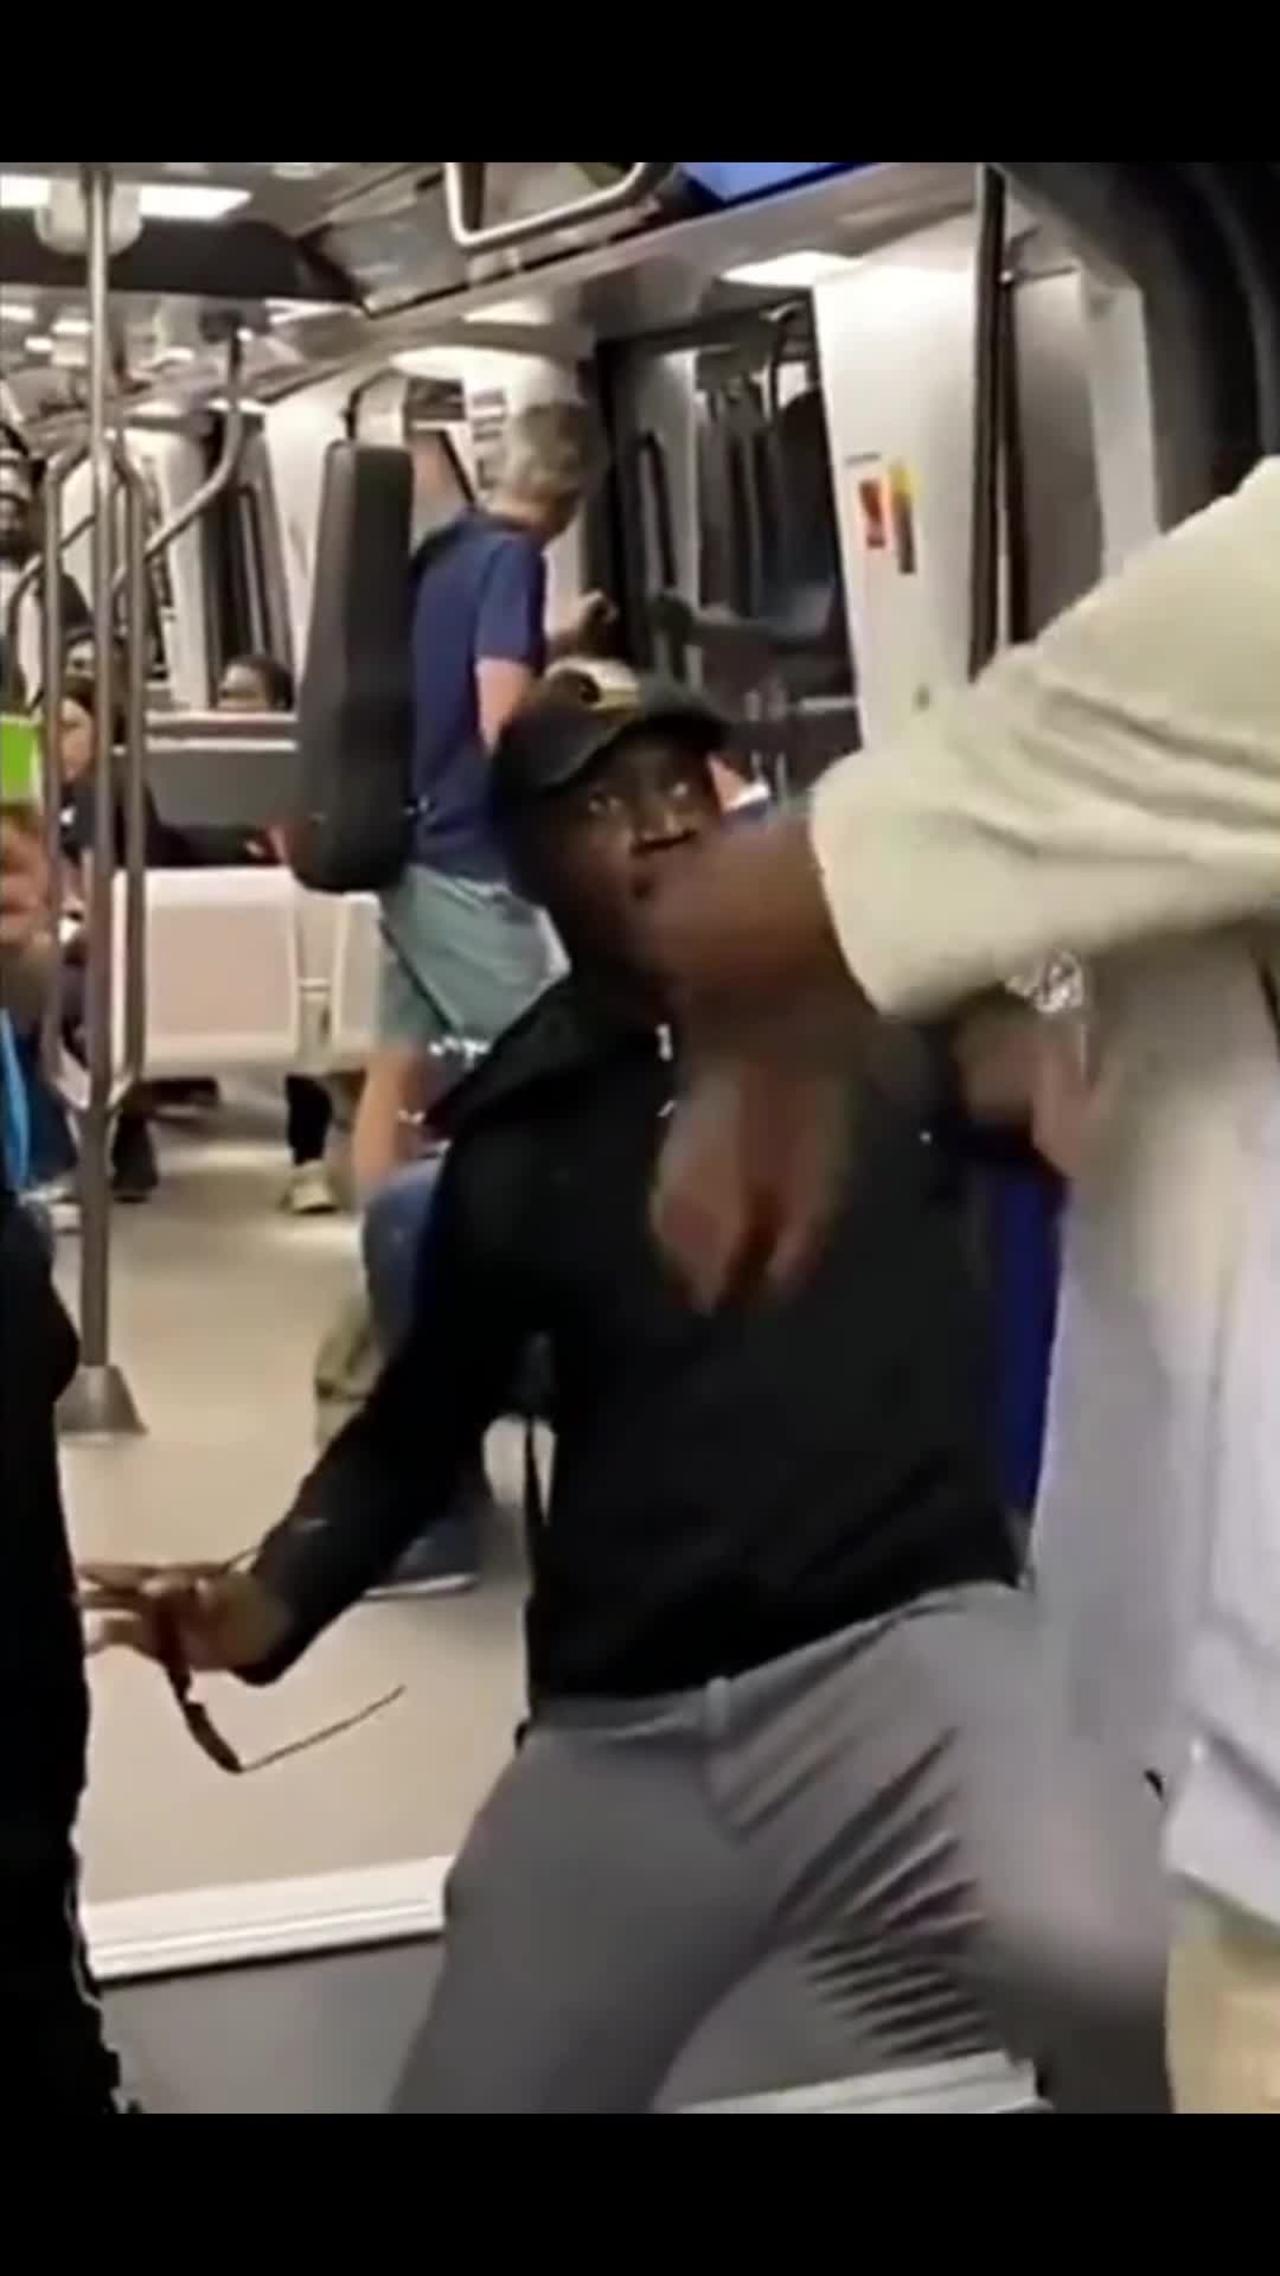 Foreign funny videos The New York subway hilarious scenes